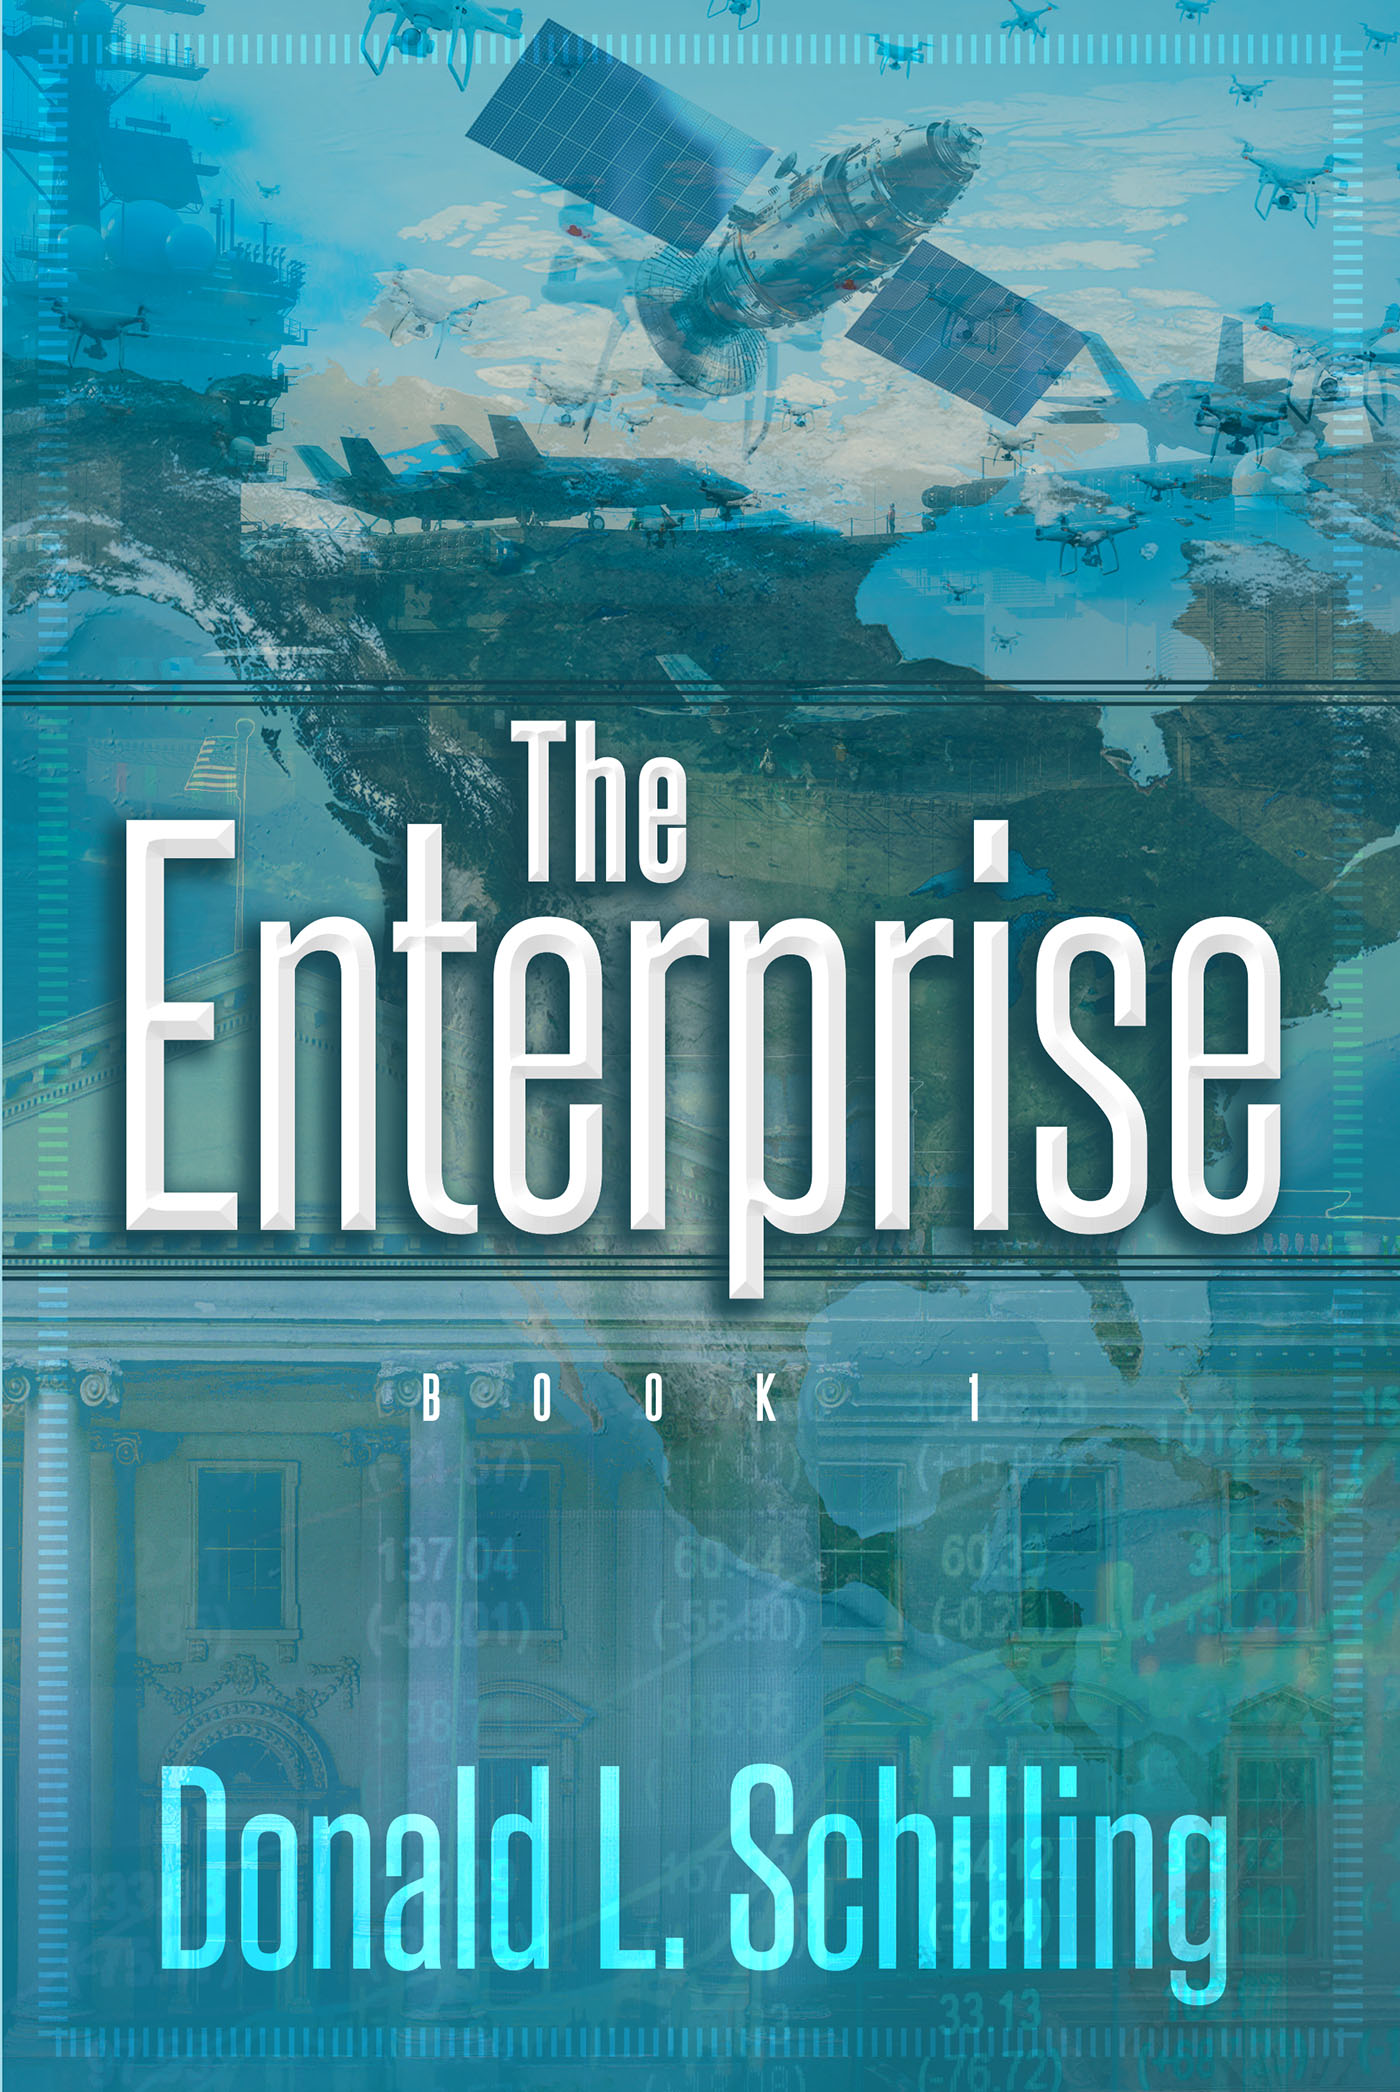 Donald L. Schilling’s Book, "The Enterprise," Explores a Fictional History in Which Brilliant Minds Formed Their Own Country Post WWII for the Advancement of the World